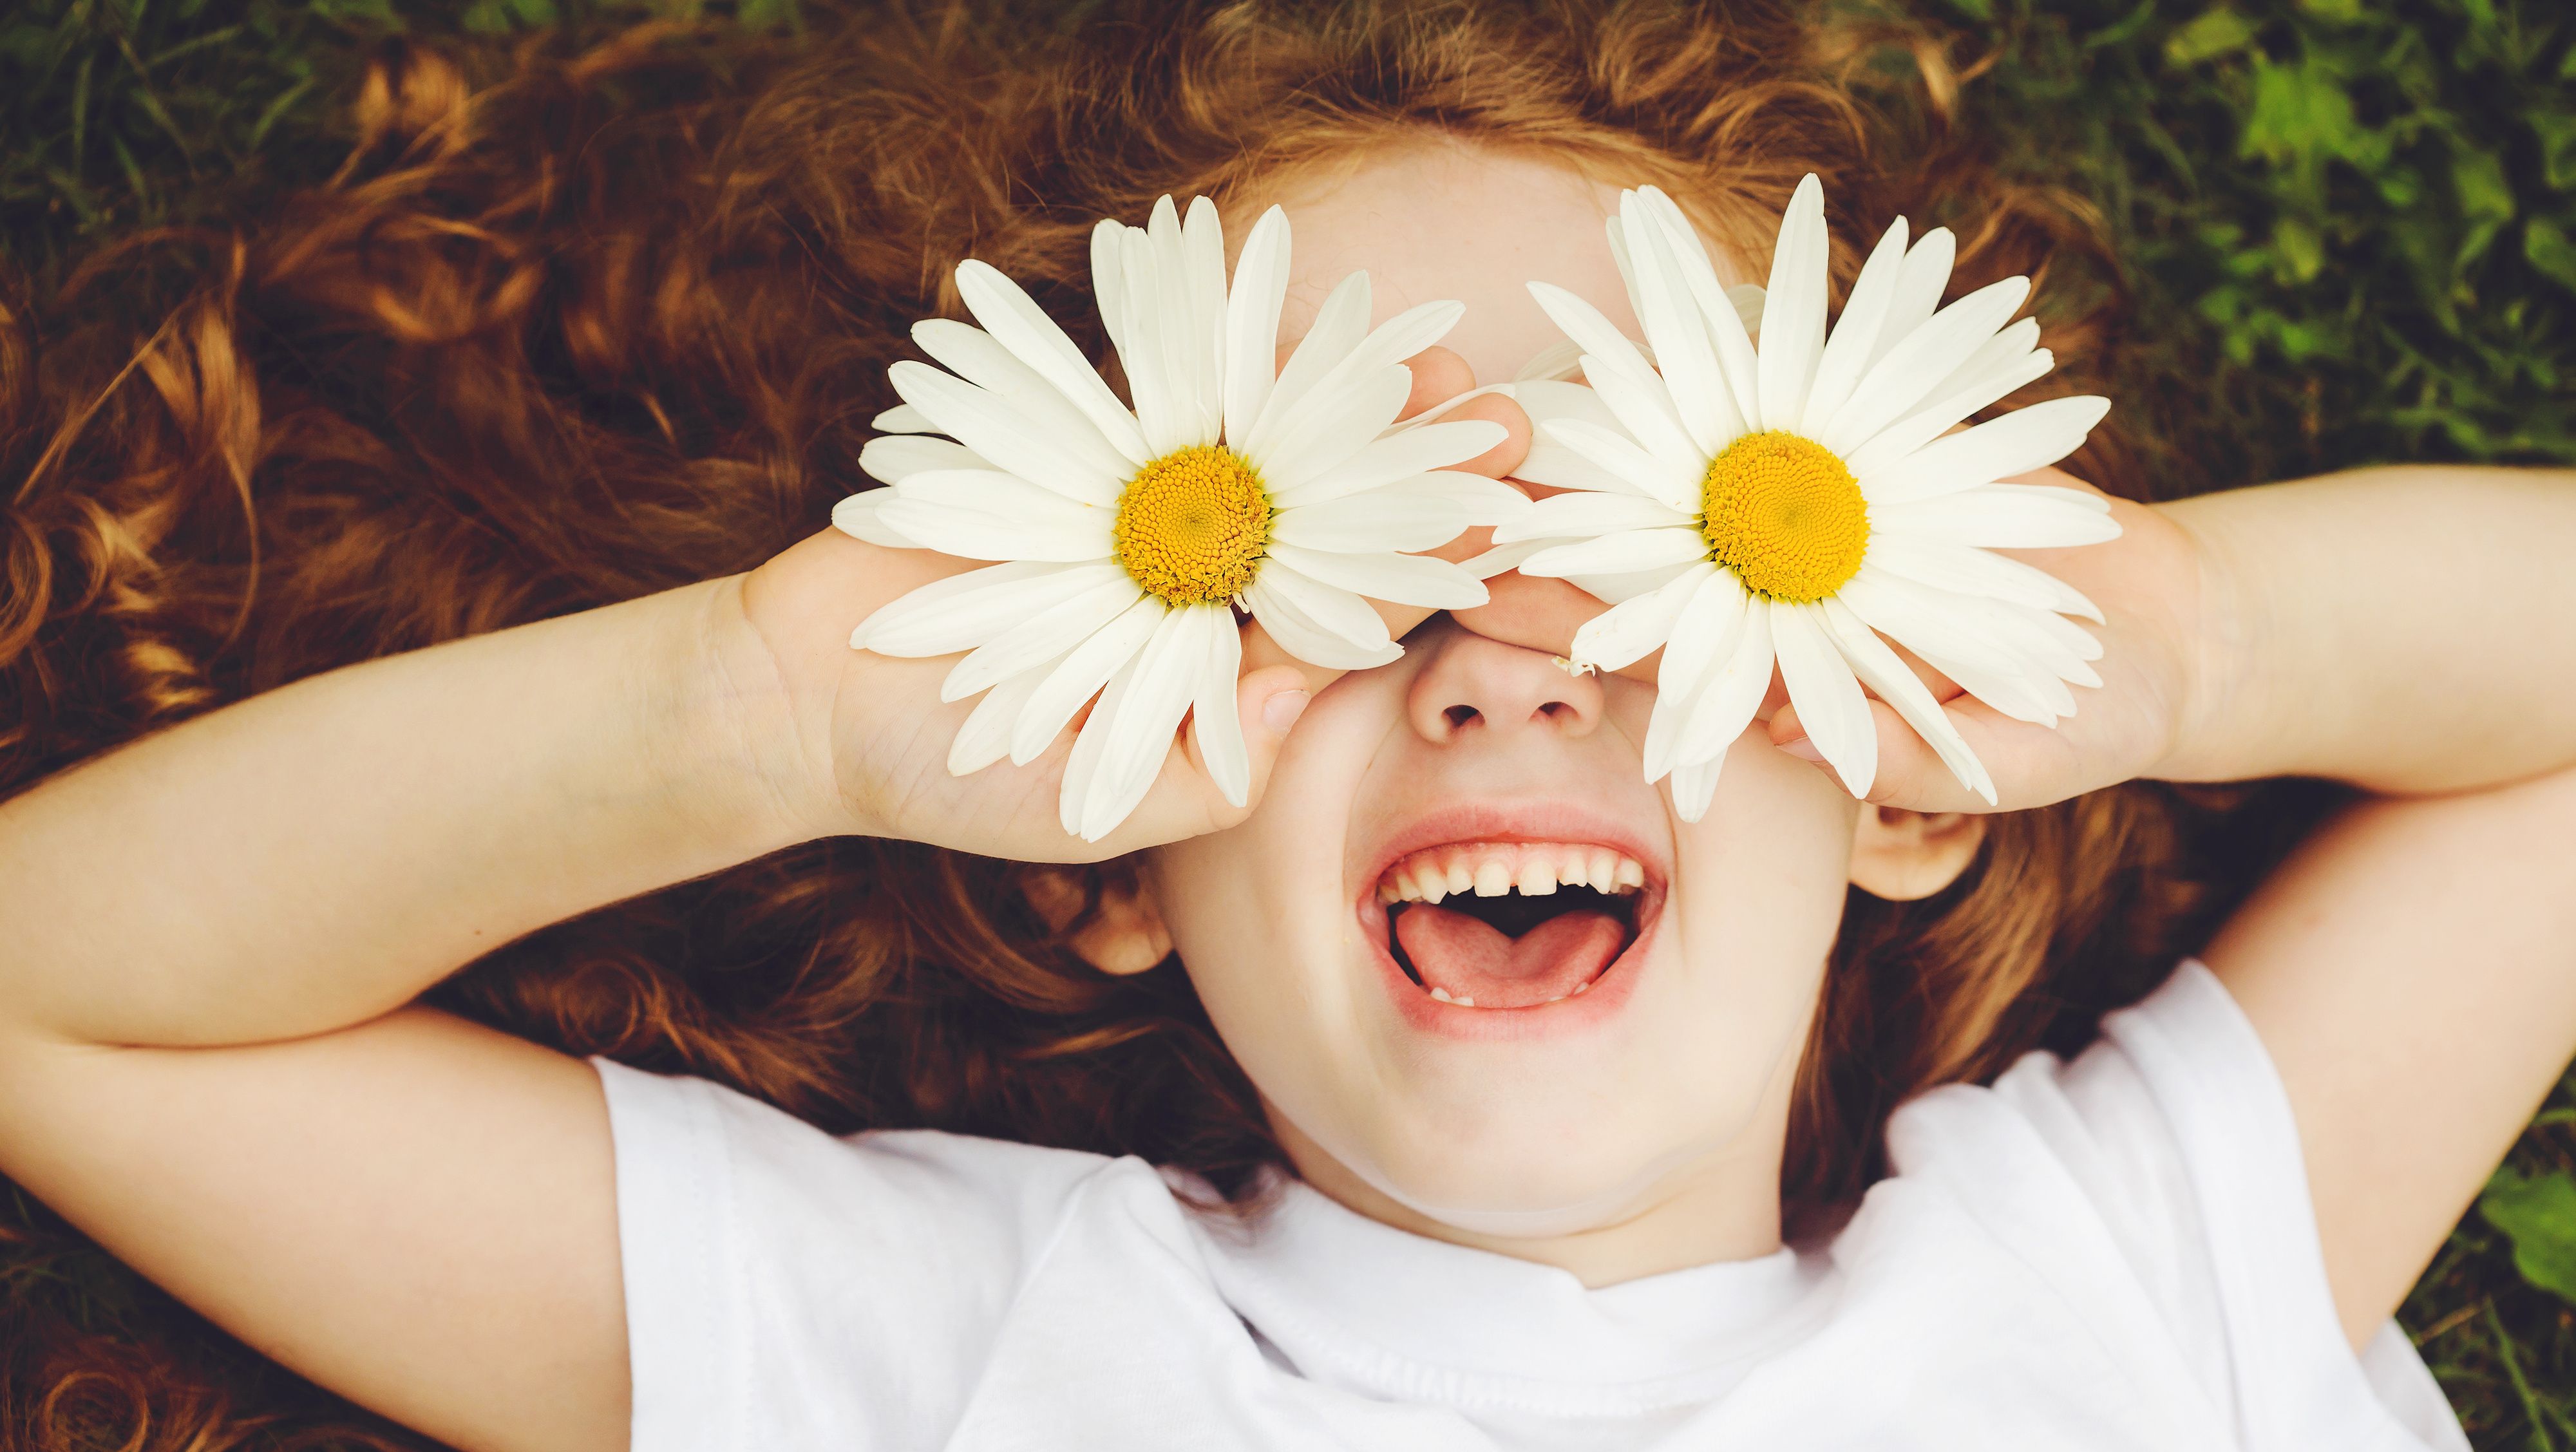 a young girl laughing and playing outside in the summer with daisies over her eyes